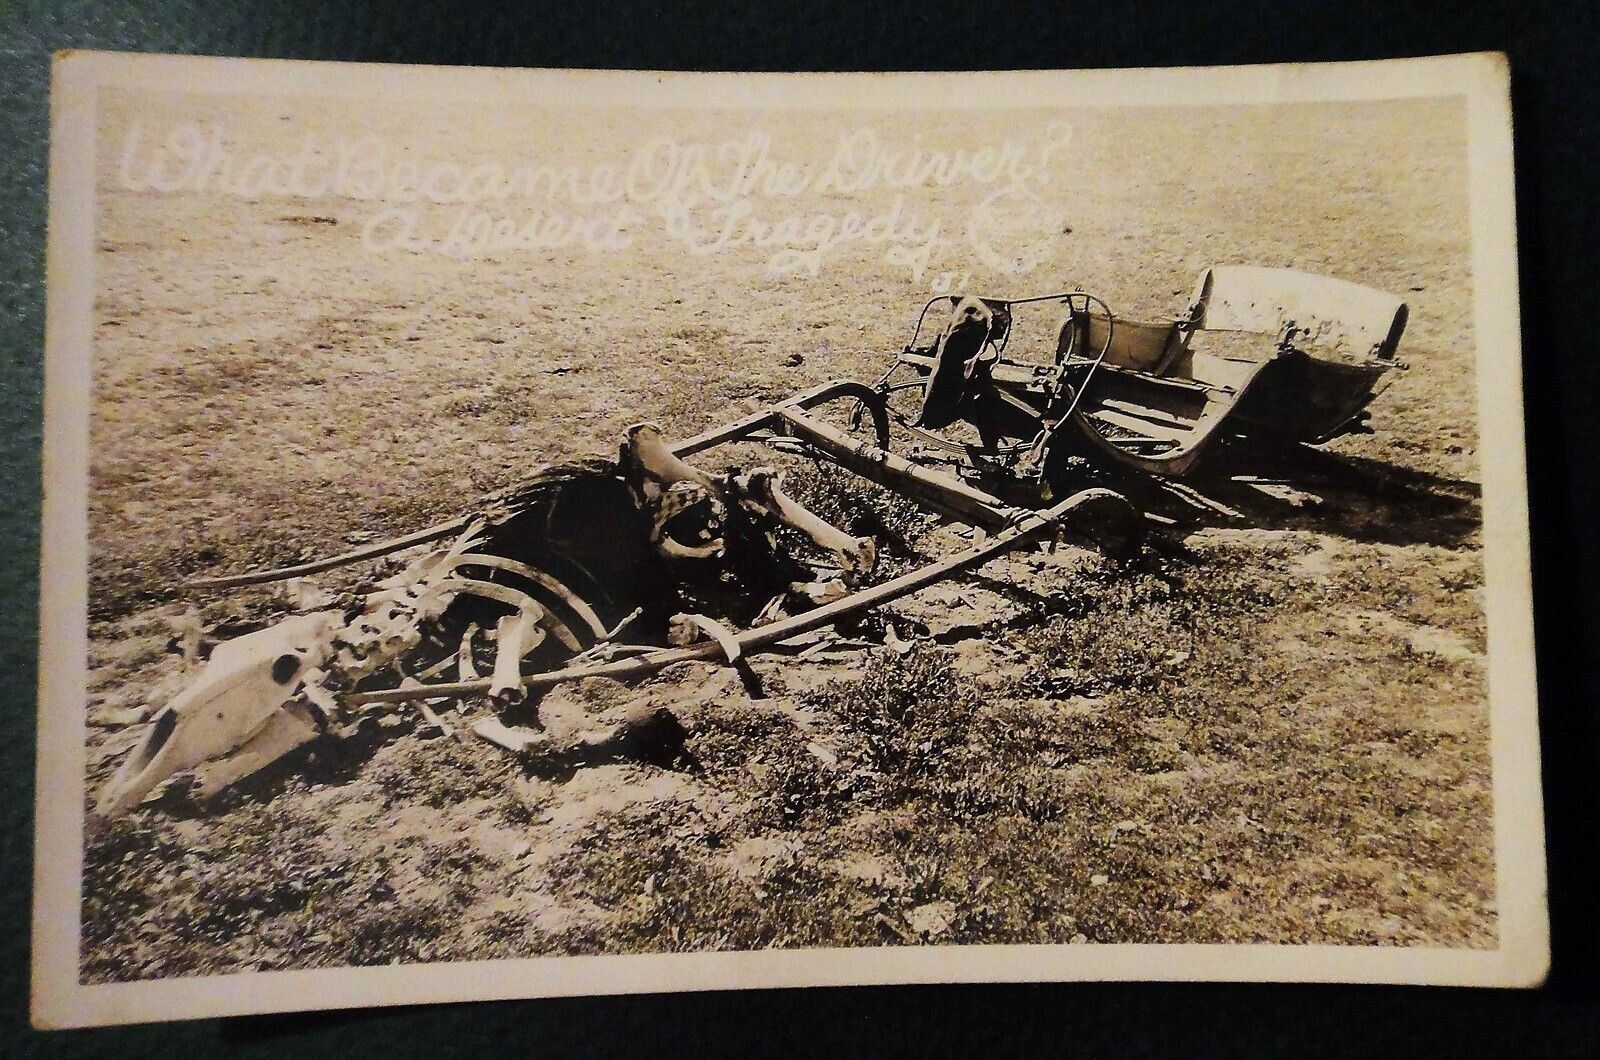 antique REAL PHOTO POSTCARD of HORSE? BONE CARCASS w/ABANDONED BROKEN CARRIAGE